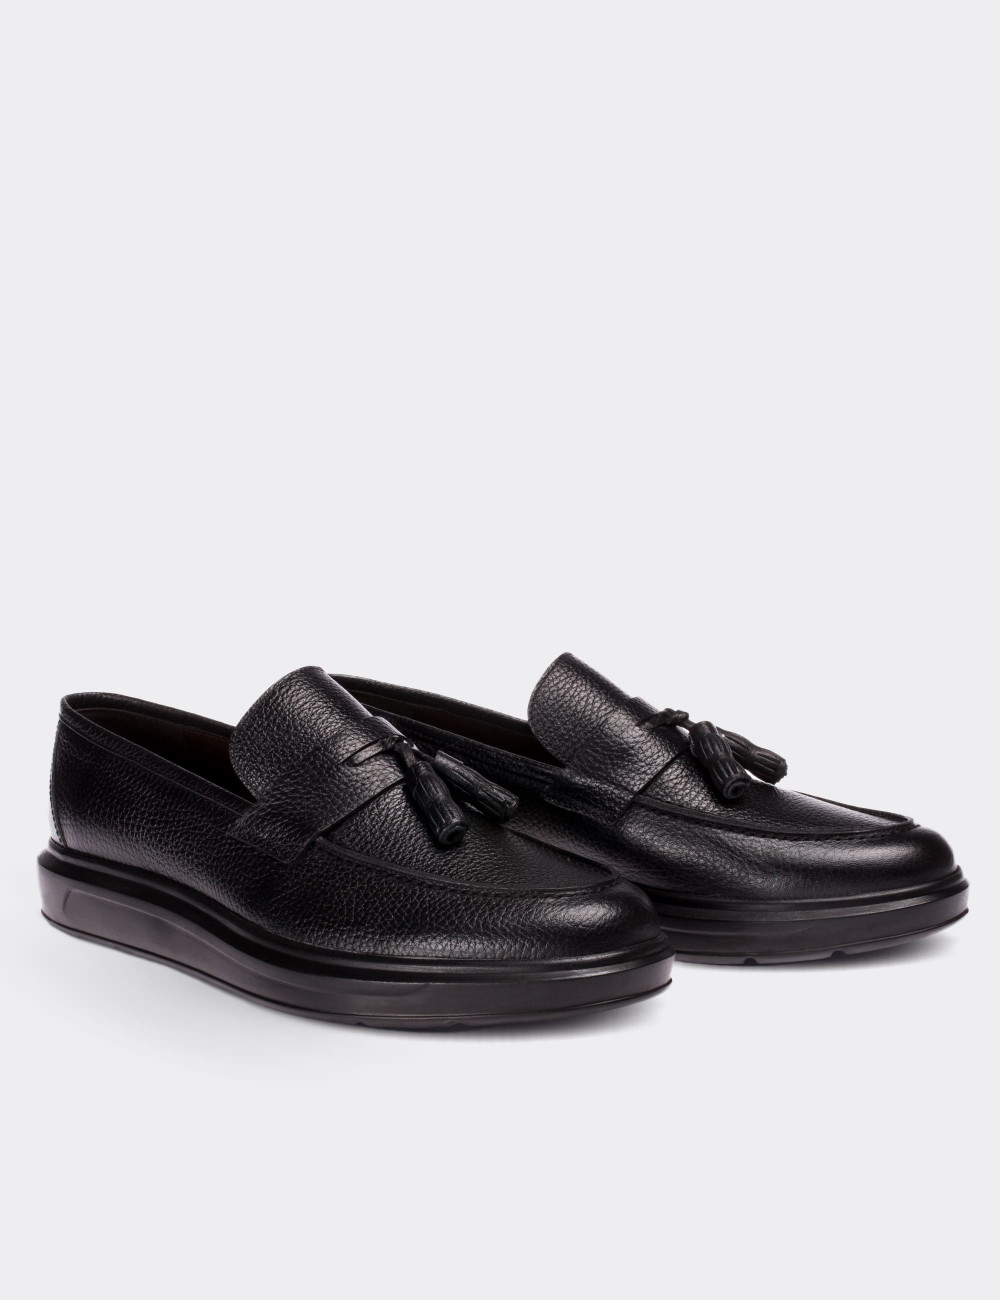 Black  Leather Loafers - 01587MSYHP04